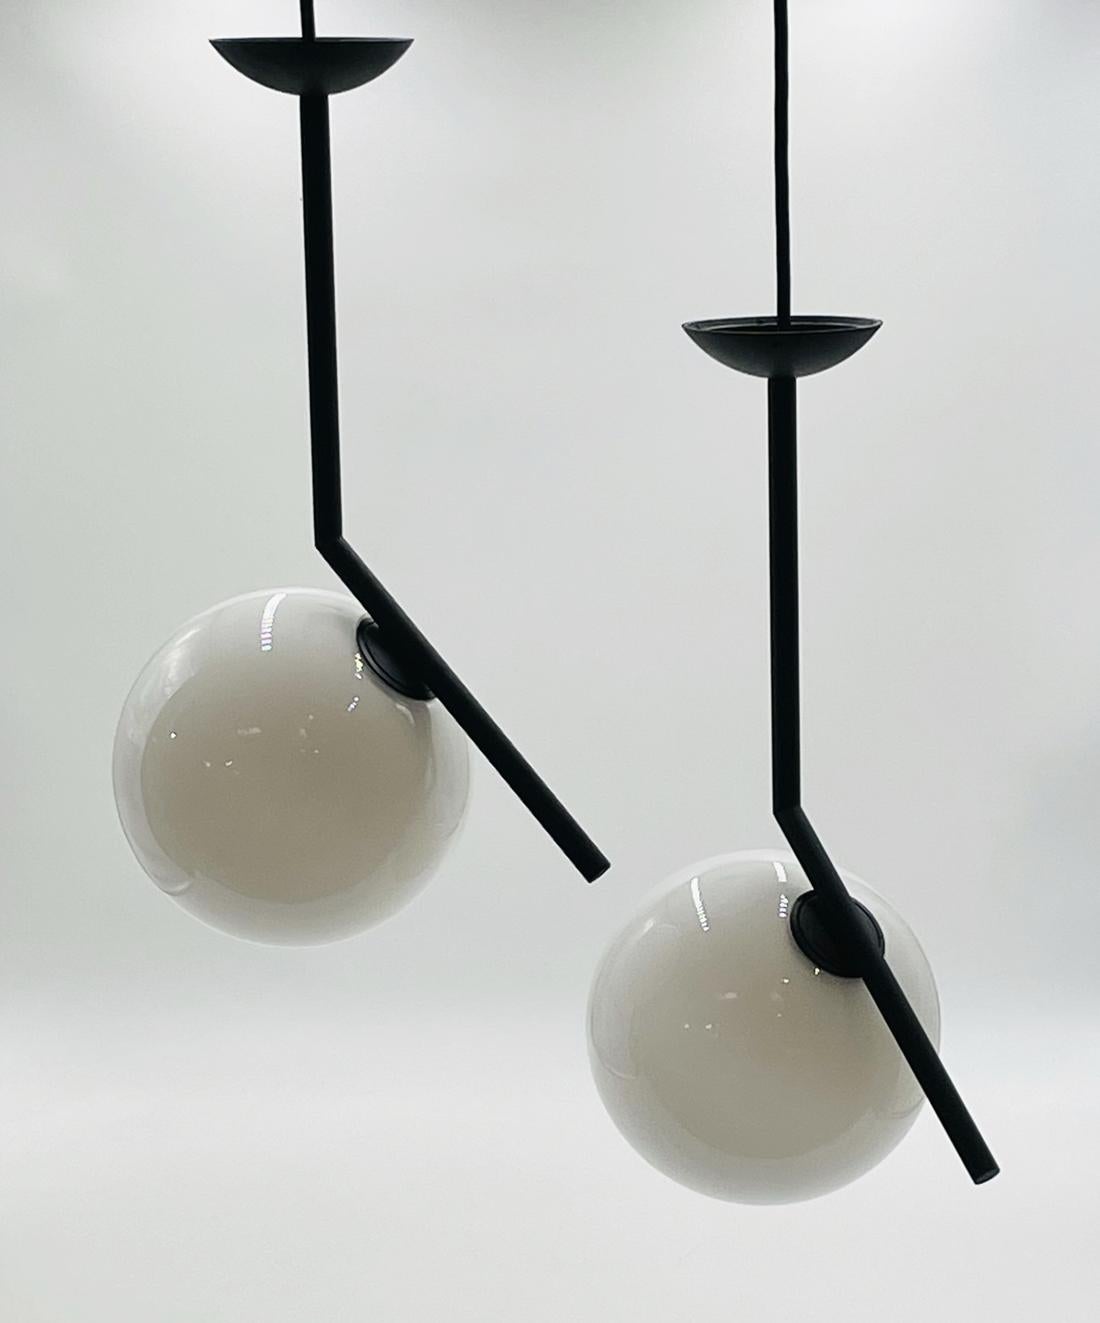 The IC S Pendant Light from FLOS is a case study in balance. After watching a video clip of a contact juggler, designer Michael Anastassiades was inspired by the skill it took to spin and move the set of spheres around the juggler's body. His